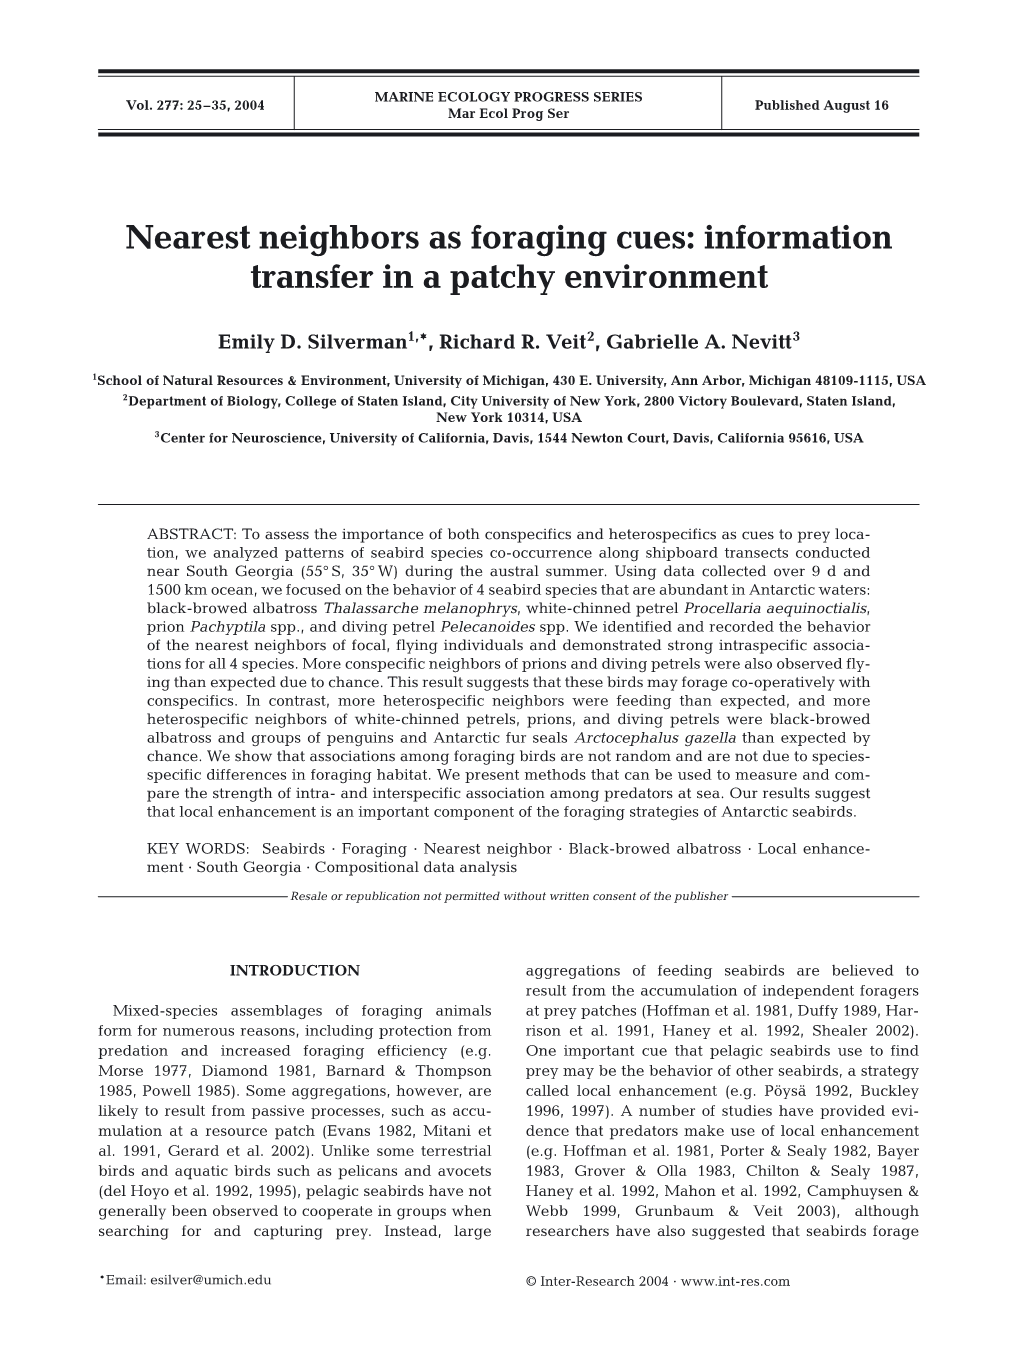 Nearest Neighbors As Foraging Cues: Information Transfer in a Patchy Environment